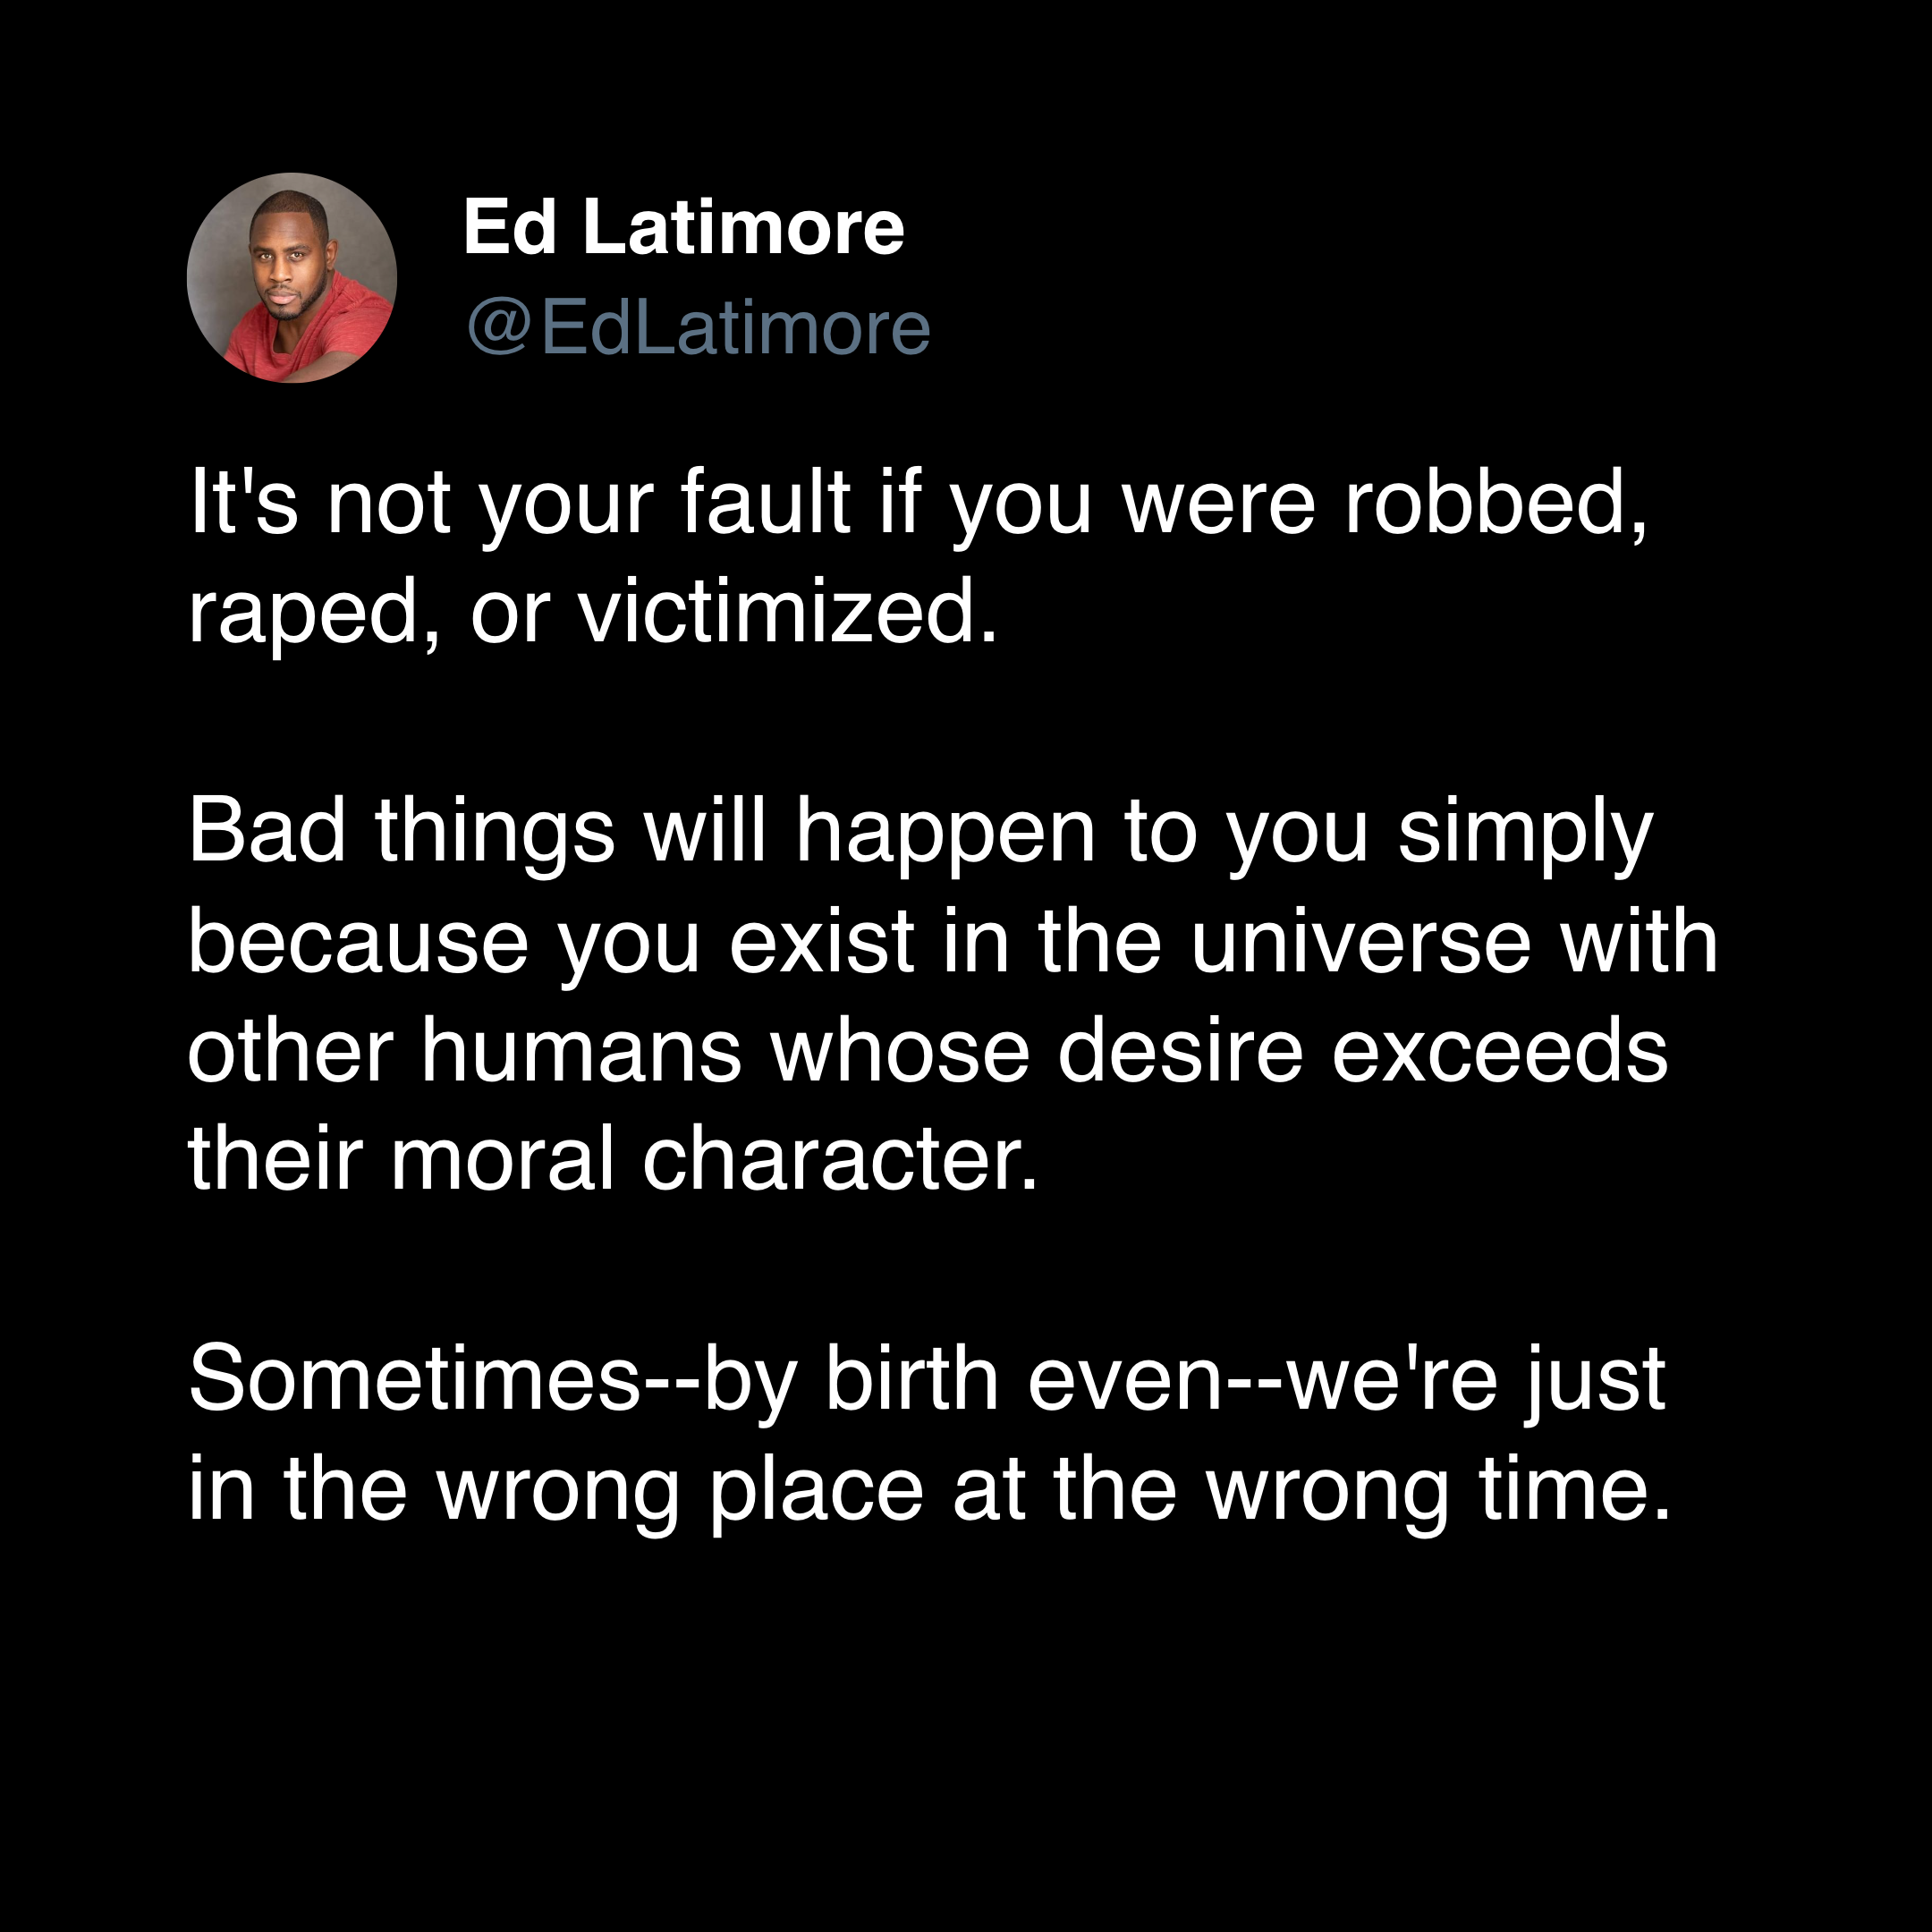 ed latimore quotes forgiveness "not your fault bad things happened"